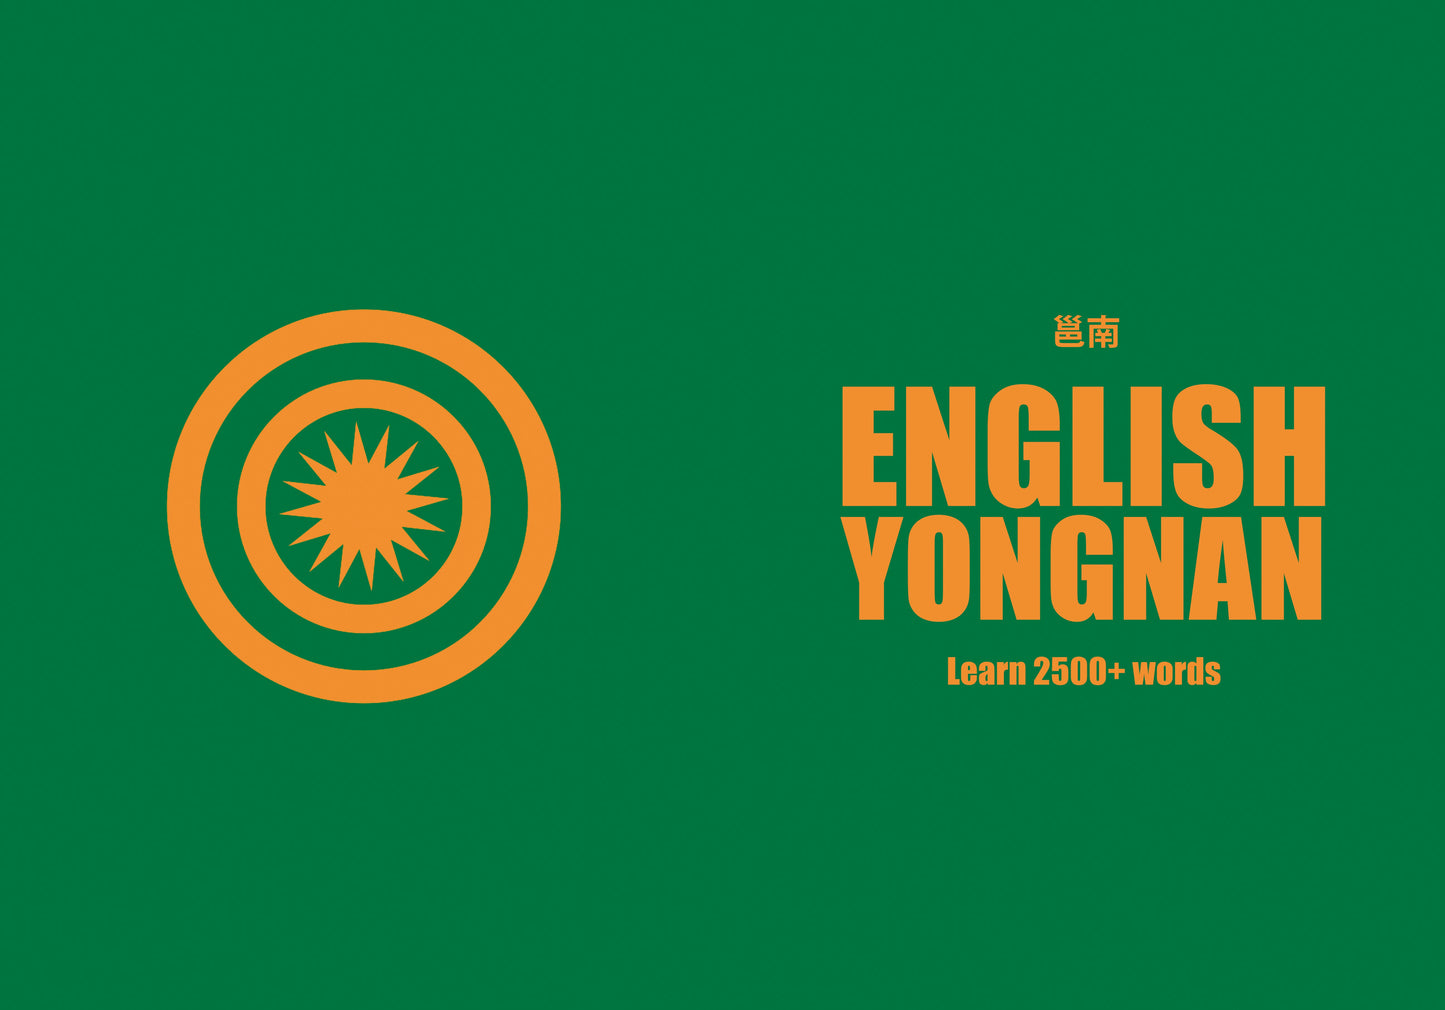 Yongnan language learning notebook cover